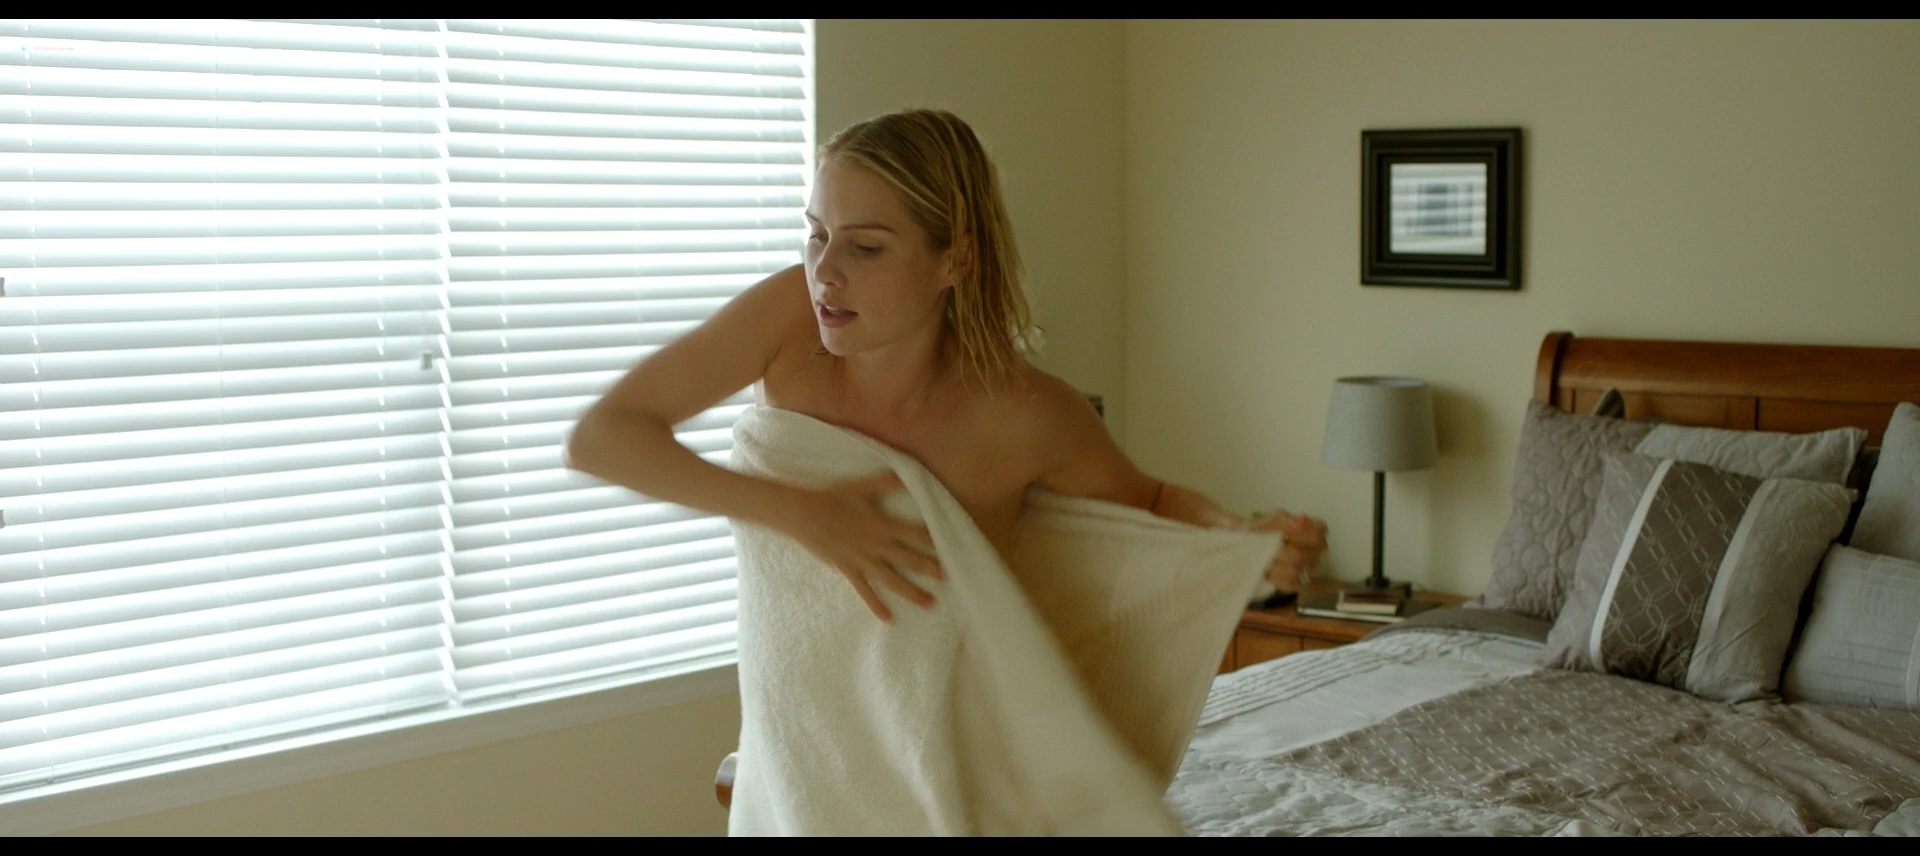 brian coonan recommends claire holt hot scene pic